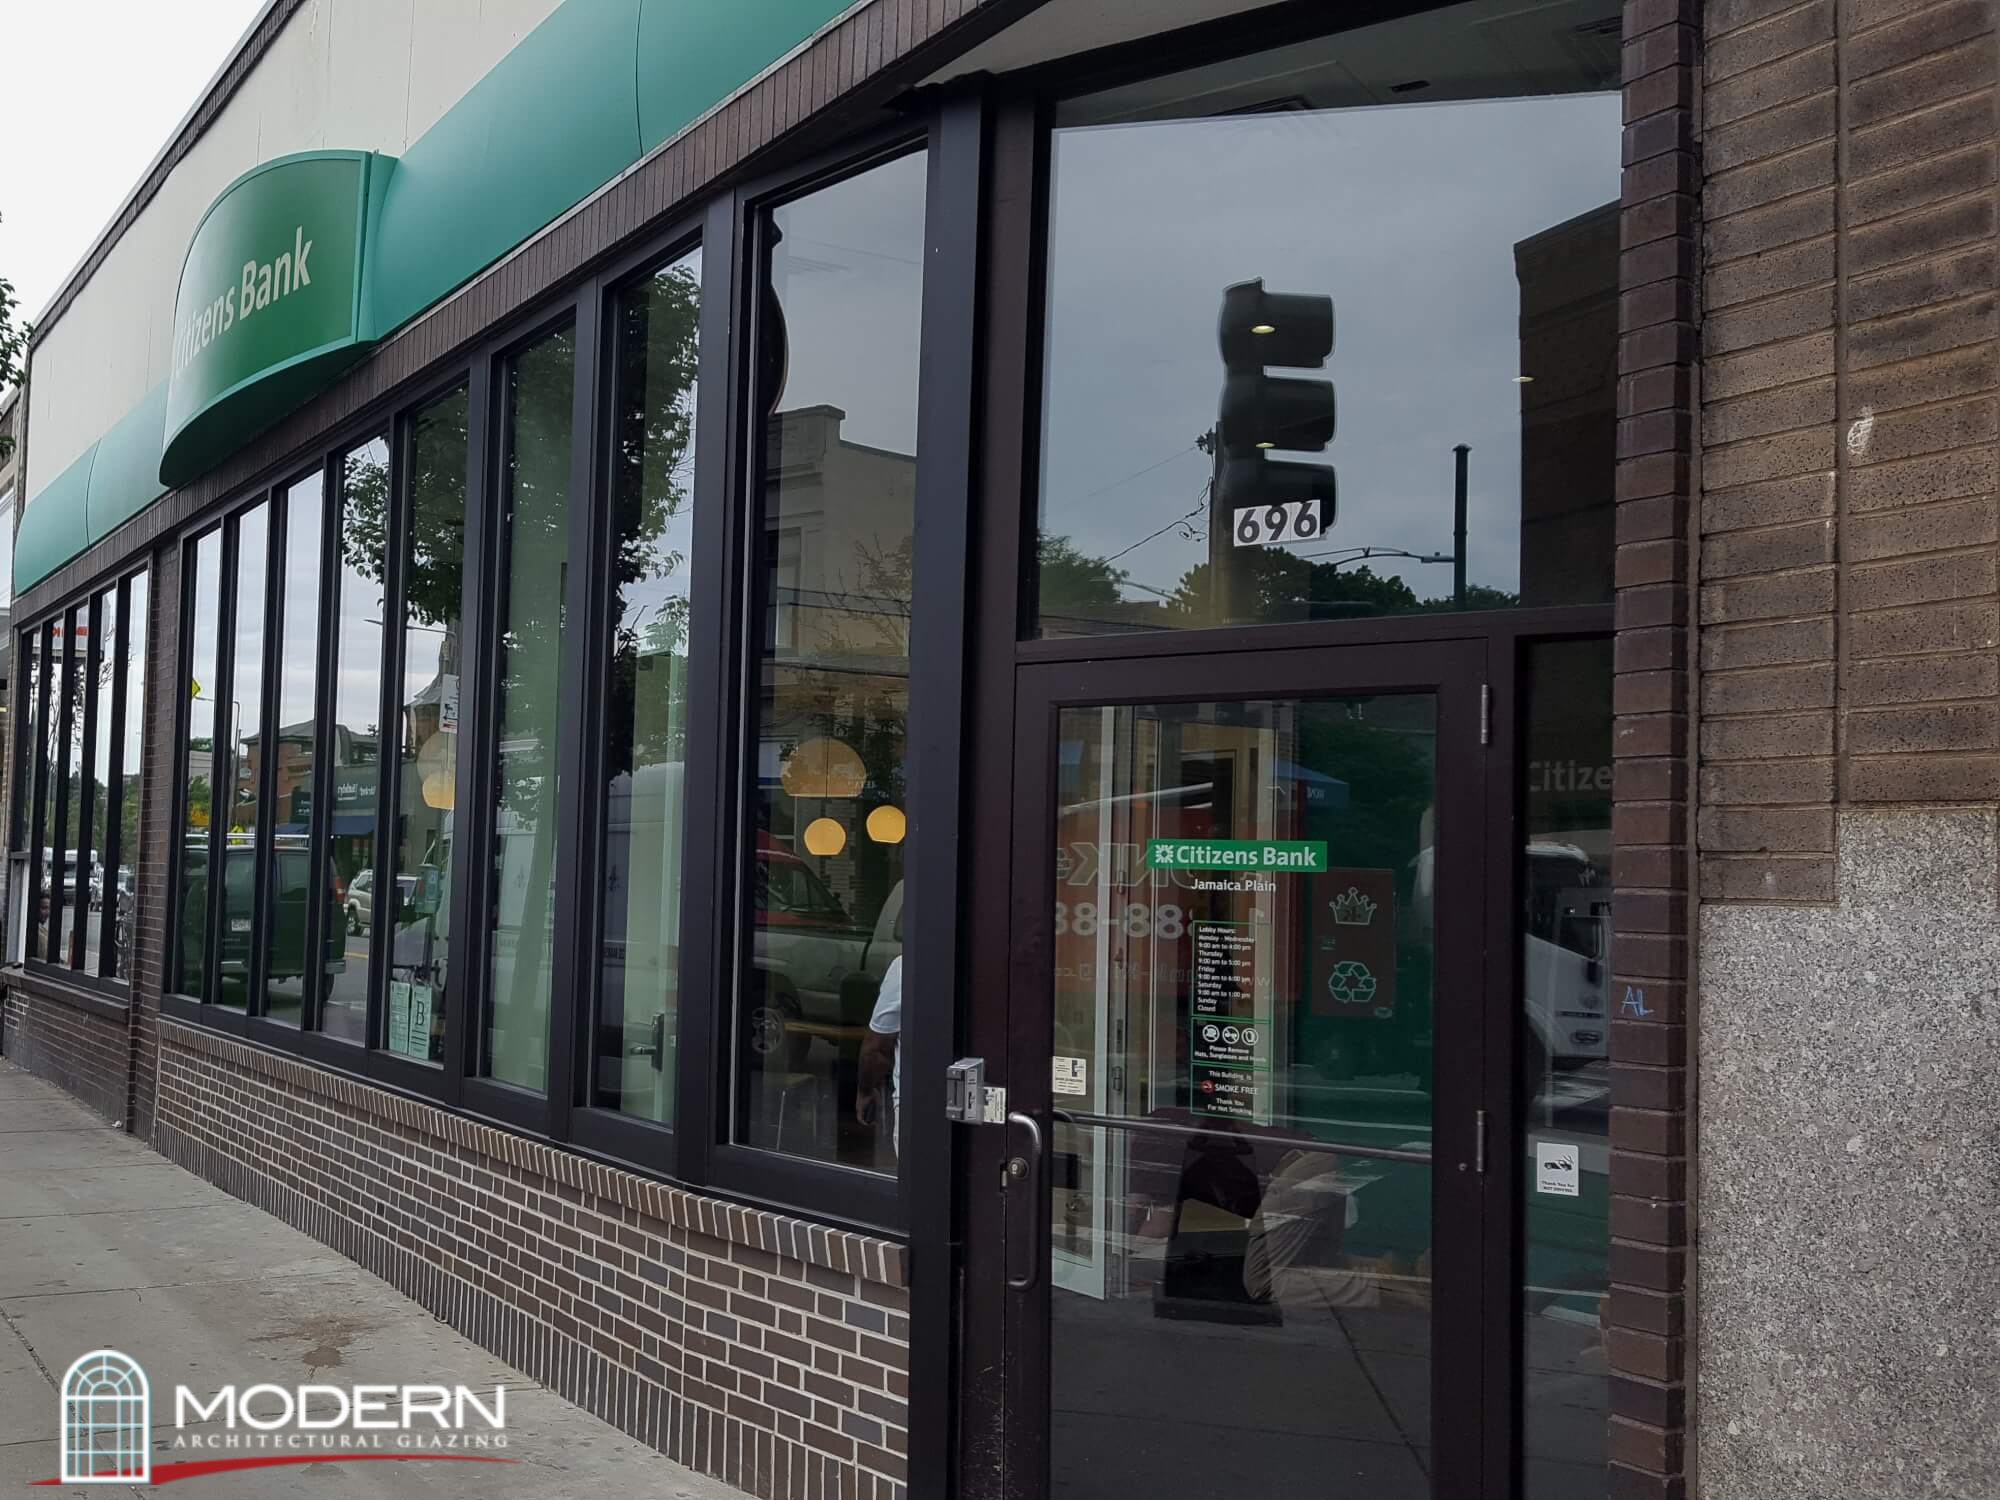 Glass Storefronts vs. Curtain Walls - A Guide for Business Owners - storefront glazing, glass storefront, storefront windows, storefront window replacement, aluminum storefront systems - Modern Glazing